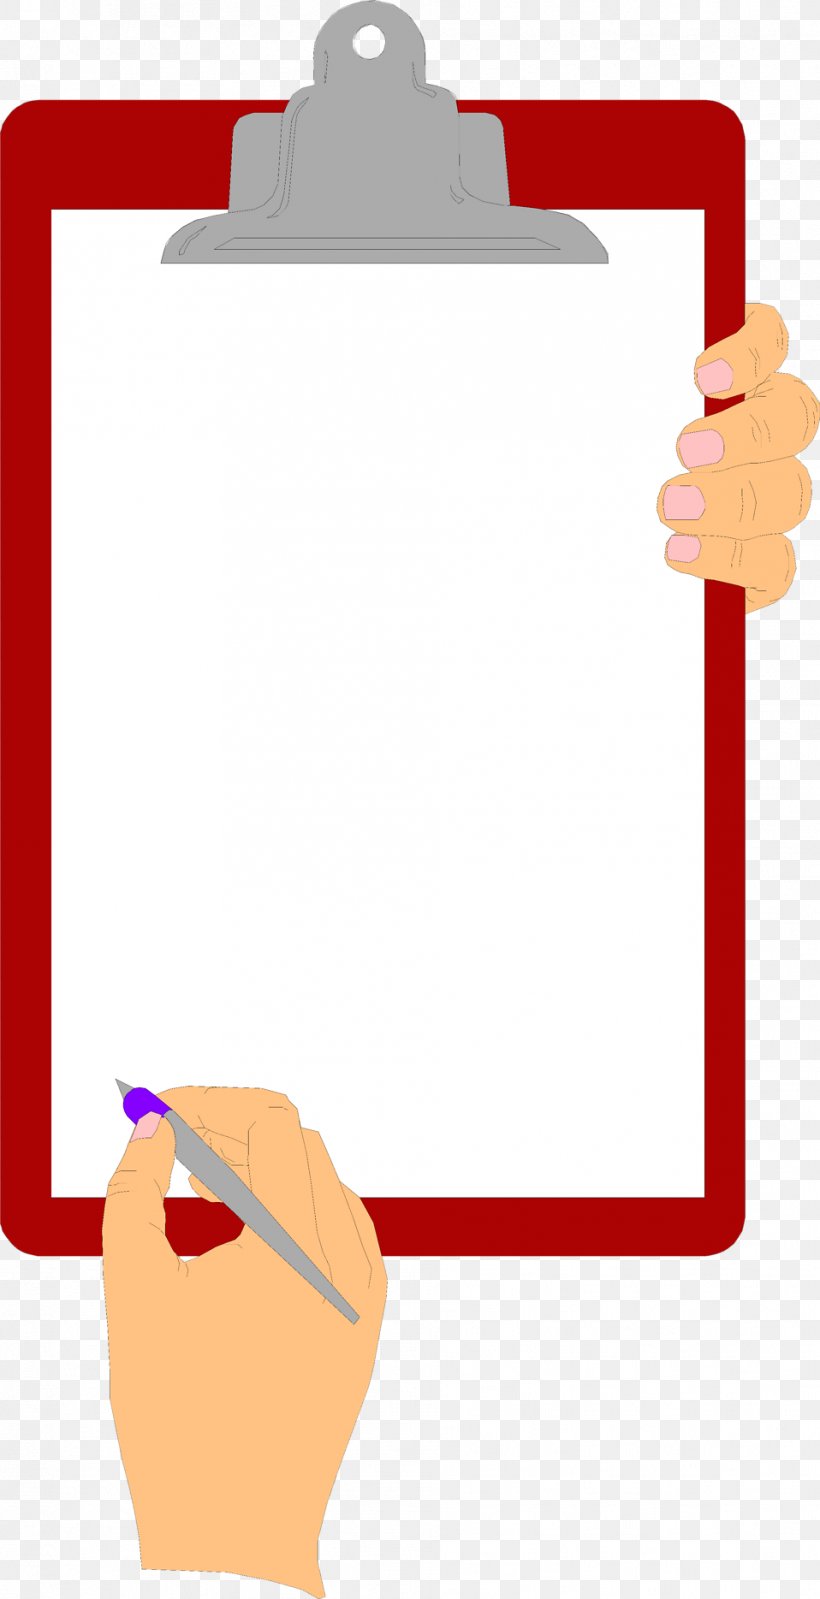 Clipboard Clip Art, PNG, 958x1869px, Clipboard, Document, Drawing, Finger, Hand Download Free